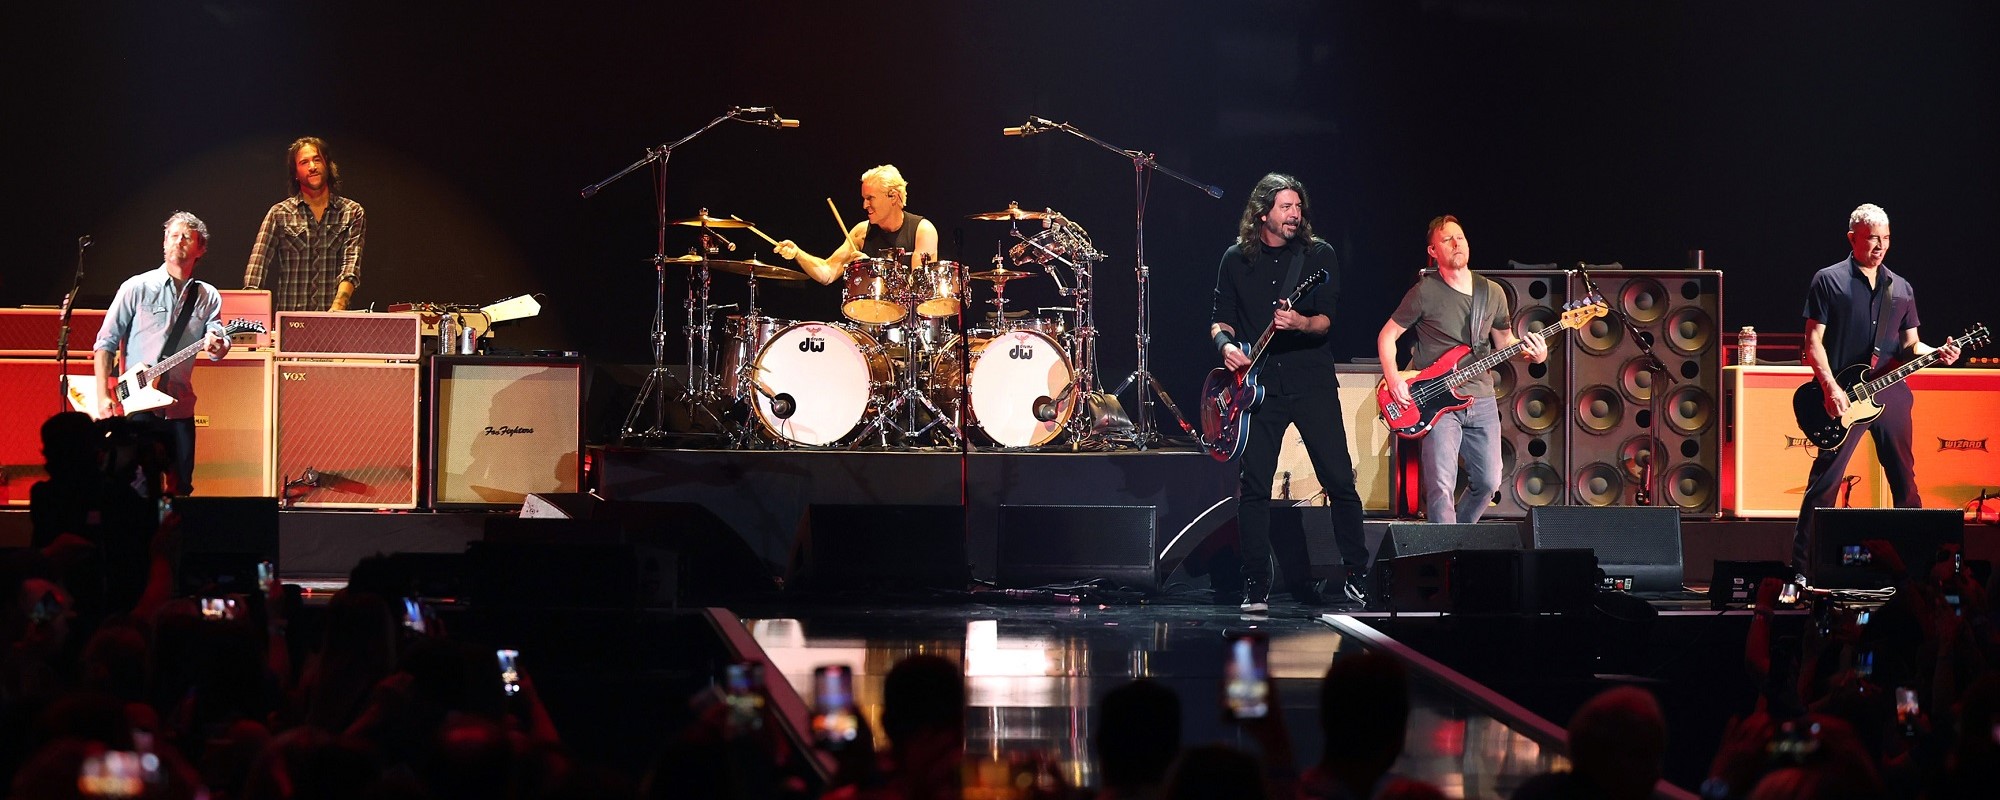 Here's Foo Fighters setlist from their Aussie shows to get you